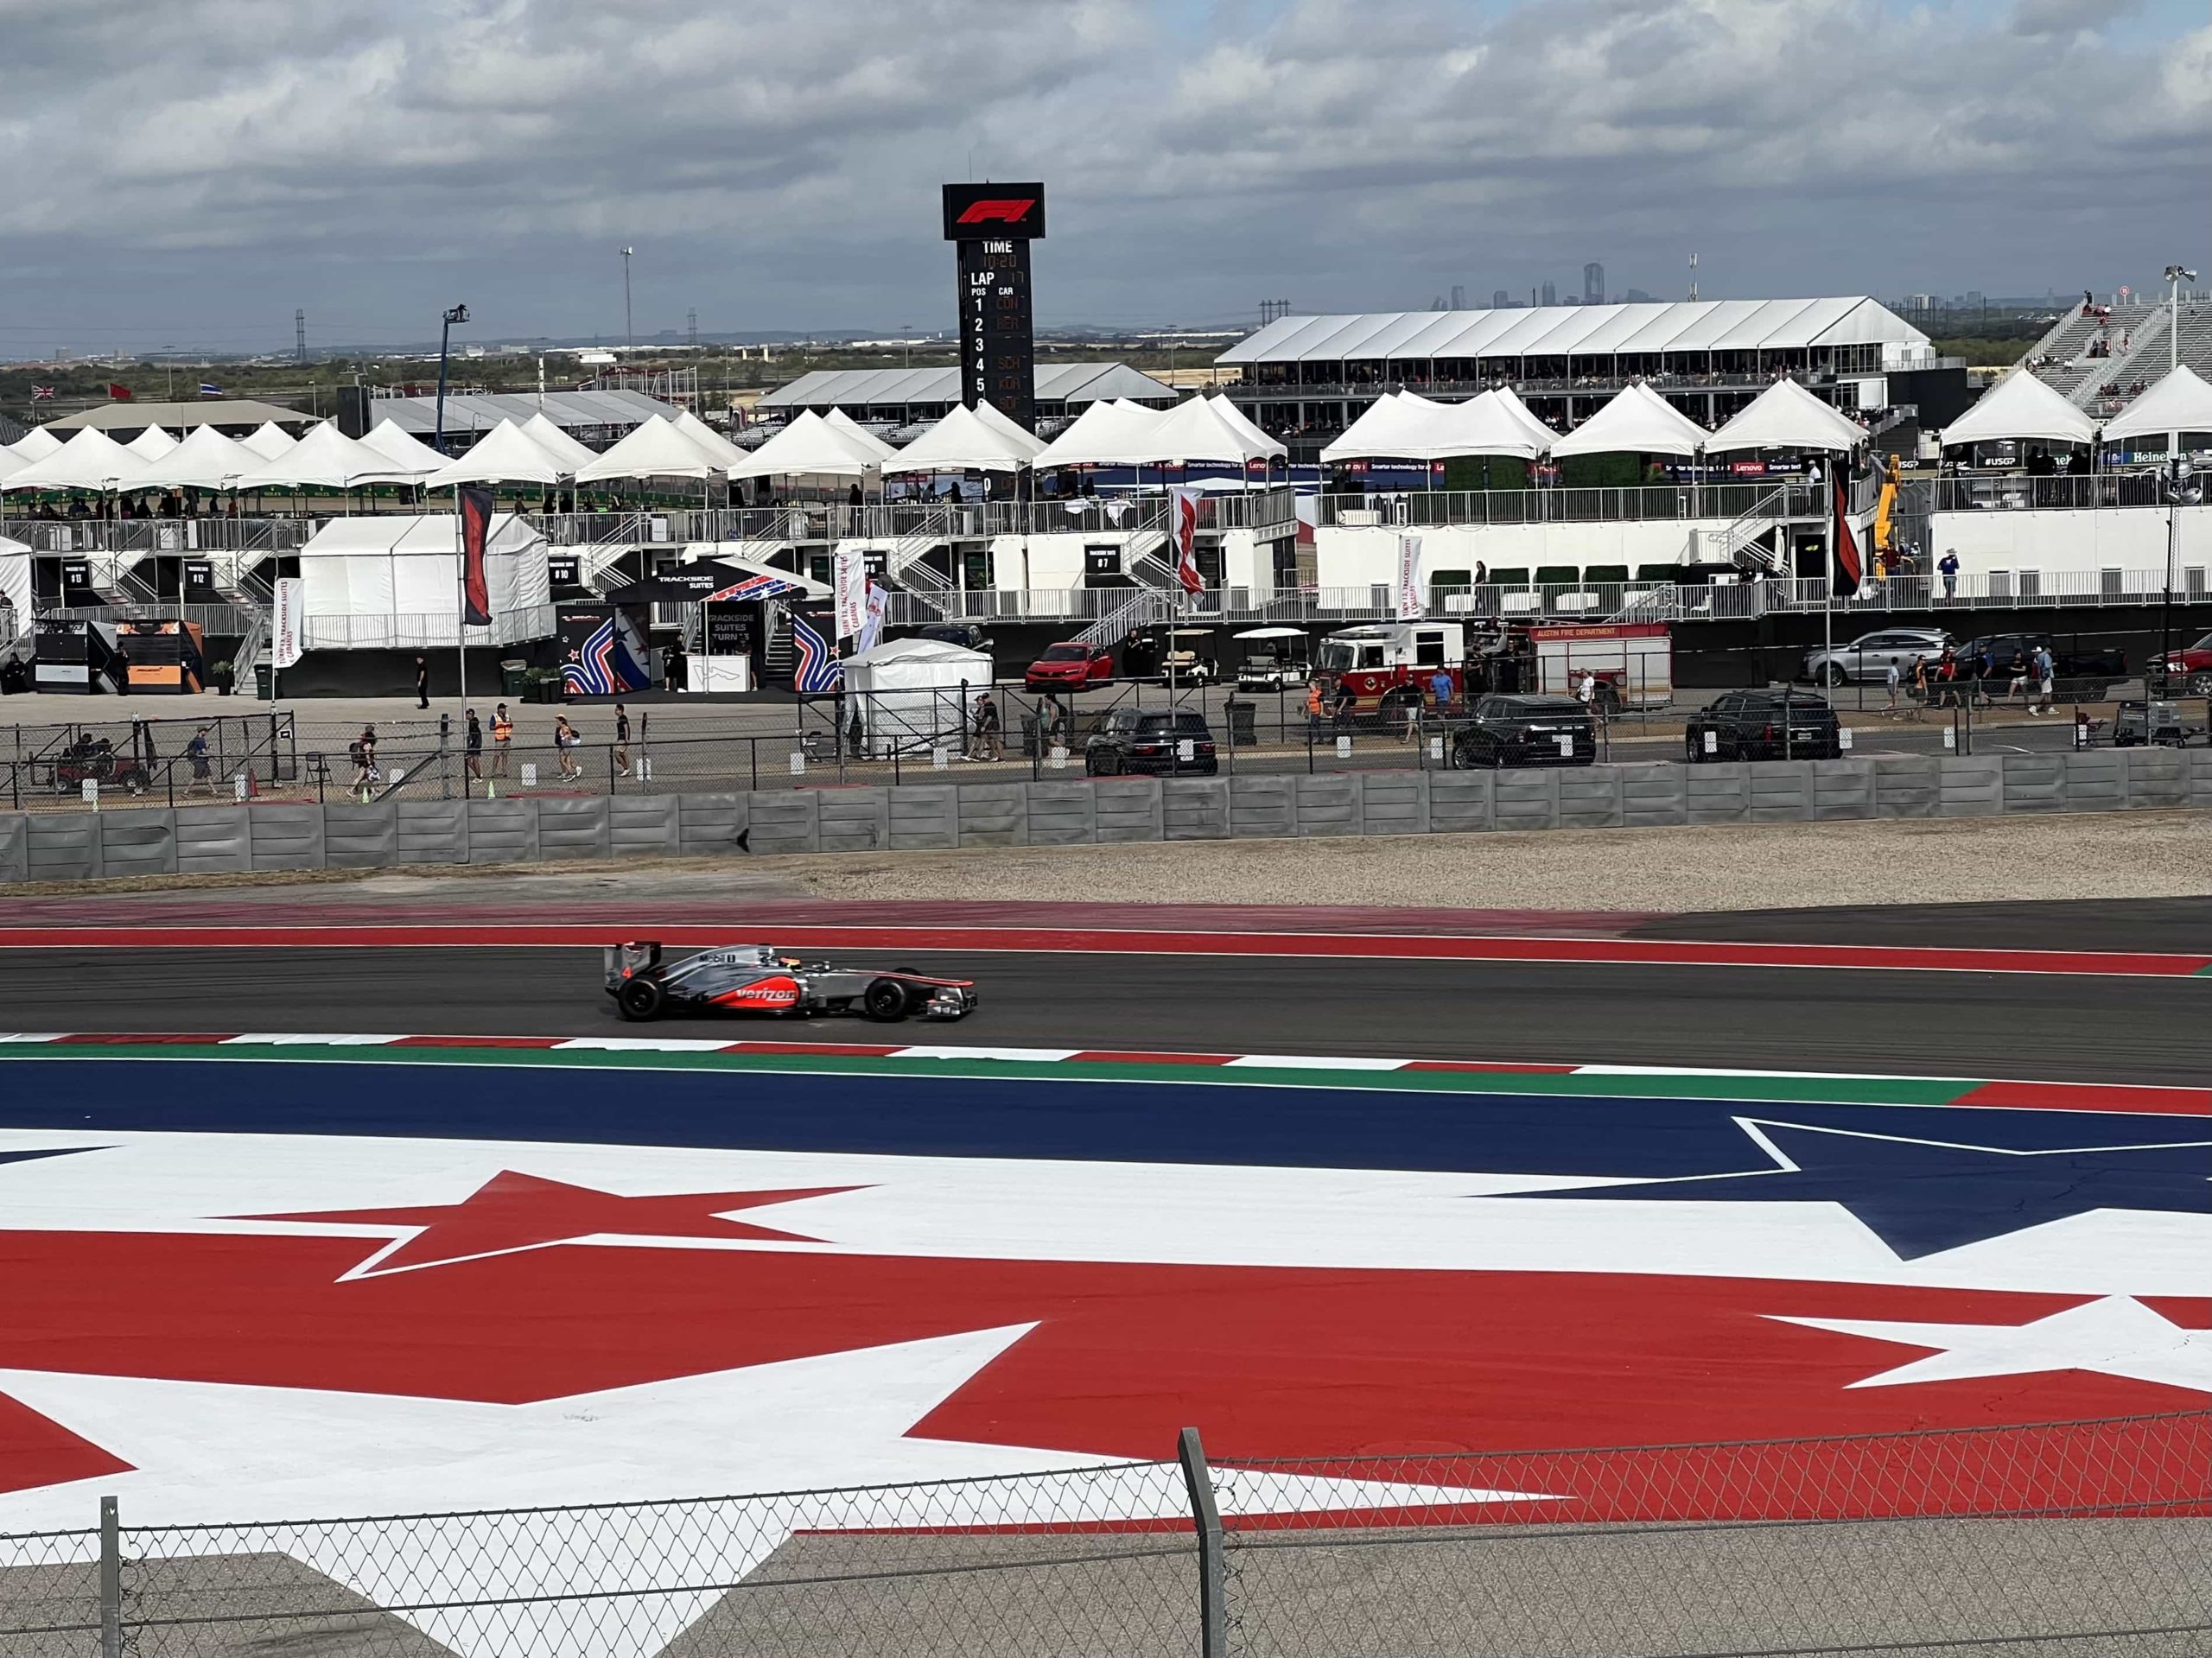 A McLaren MP4-27 in a silver and red Verizon livery on track at COTA